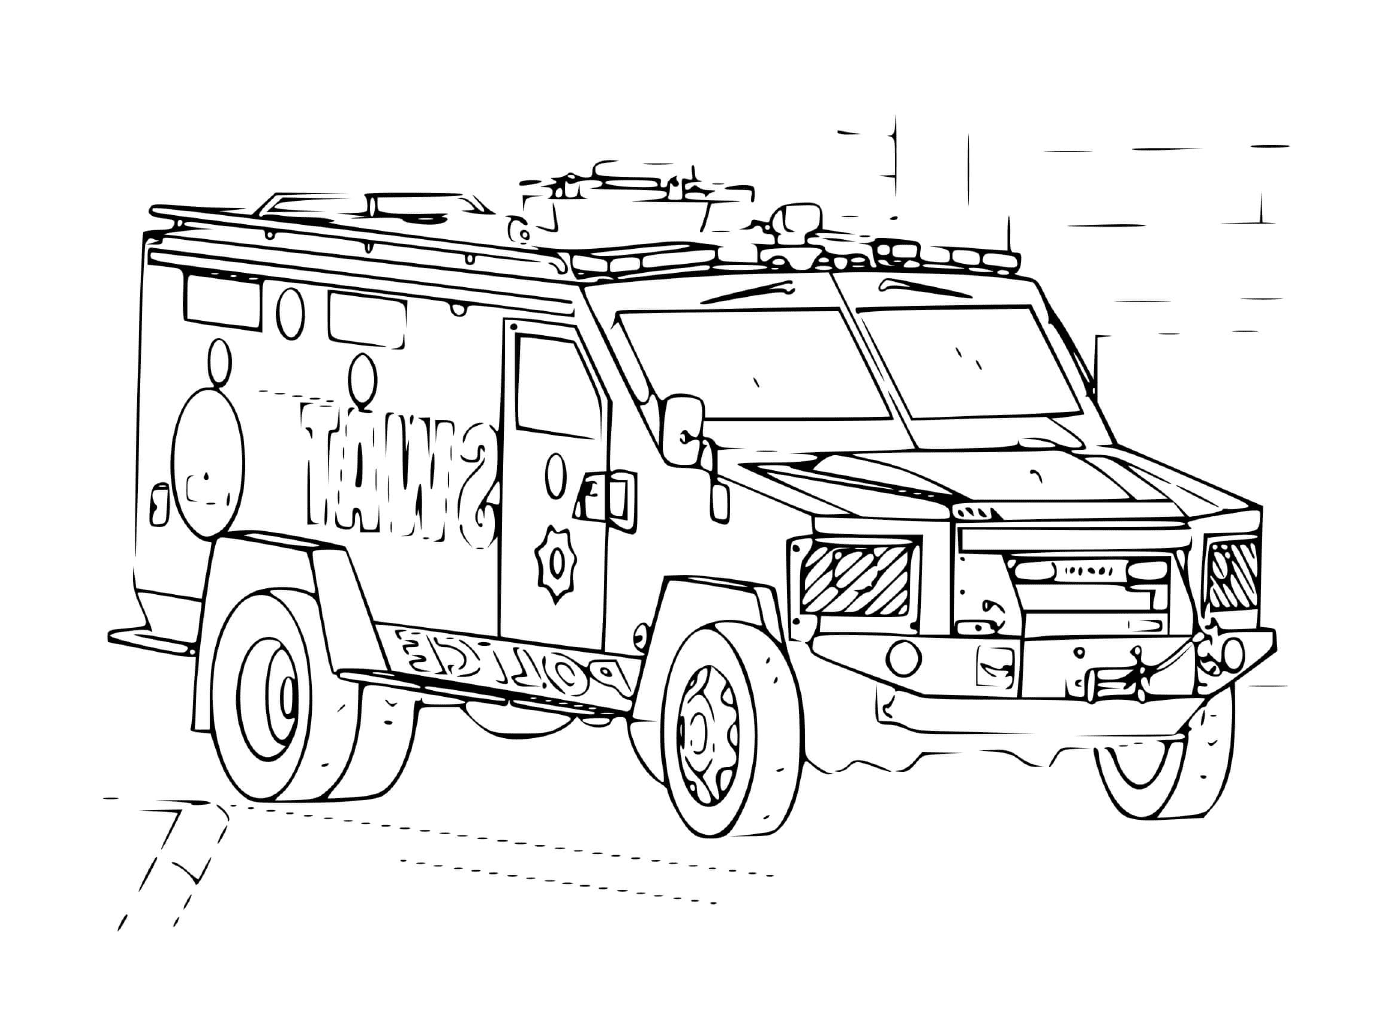  SWAT vehicle for intervention 